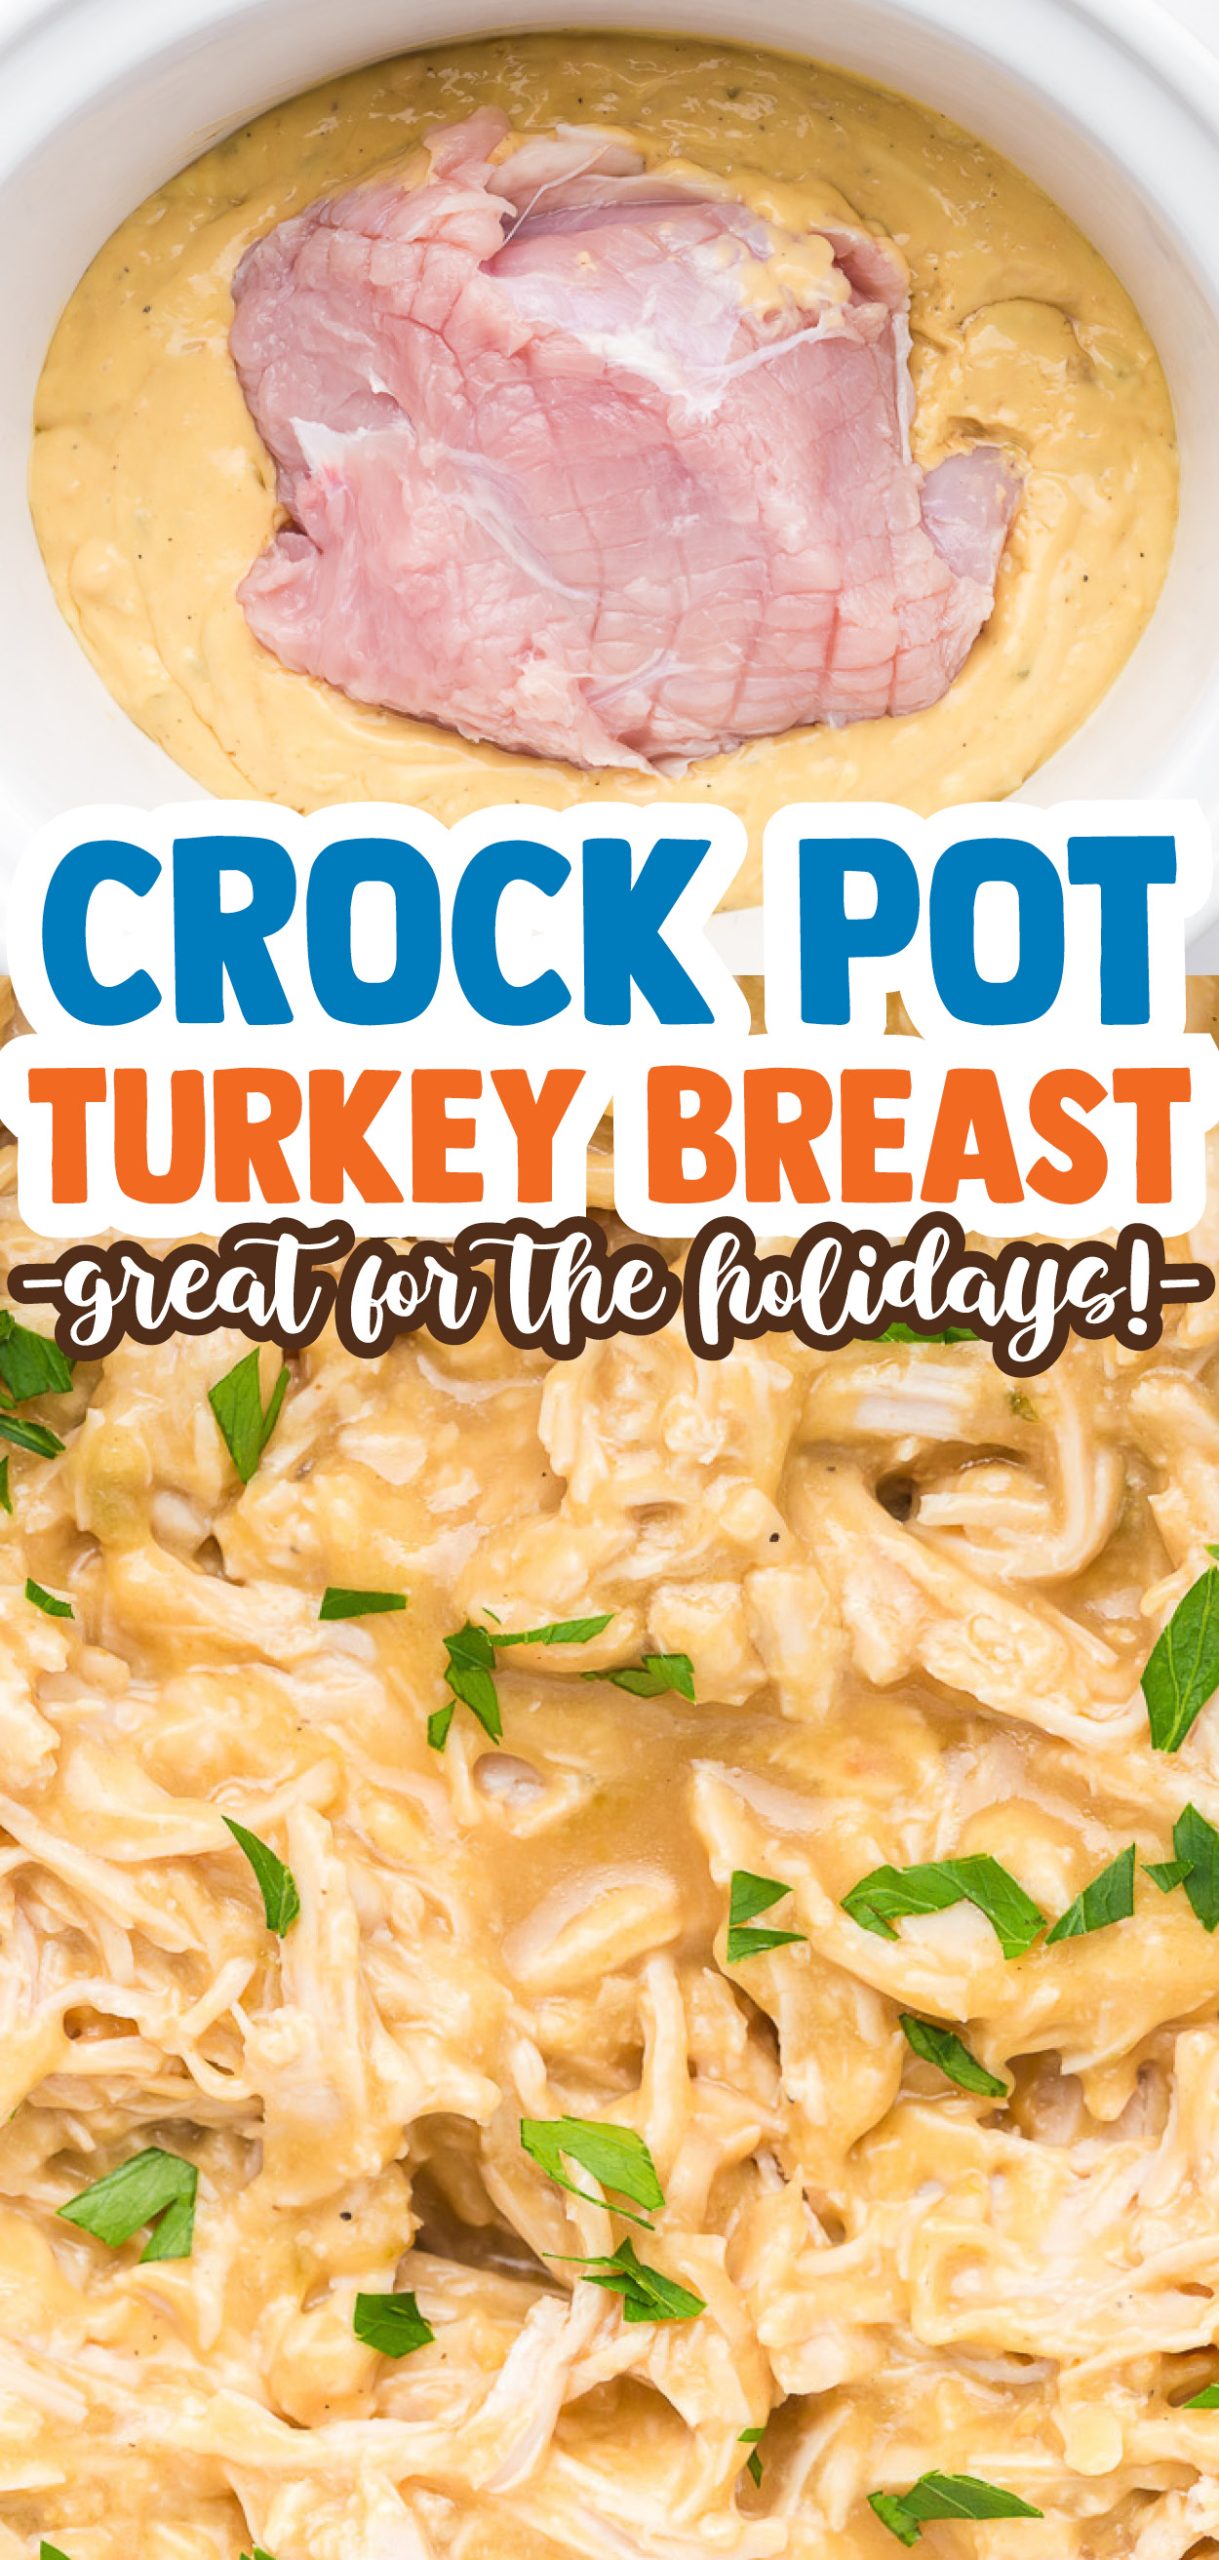 Shredded Crock Pot Turkey Breast in a delicious gravy! This slow cooker turkey breast recipe is the easiest and tastiest way to cook a turkey breast. No need for a big turkey at Thanksgiving? Try this!